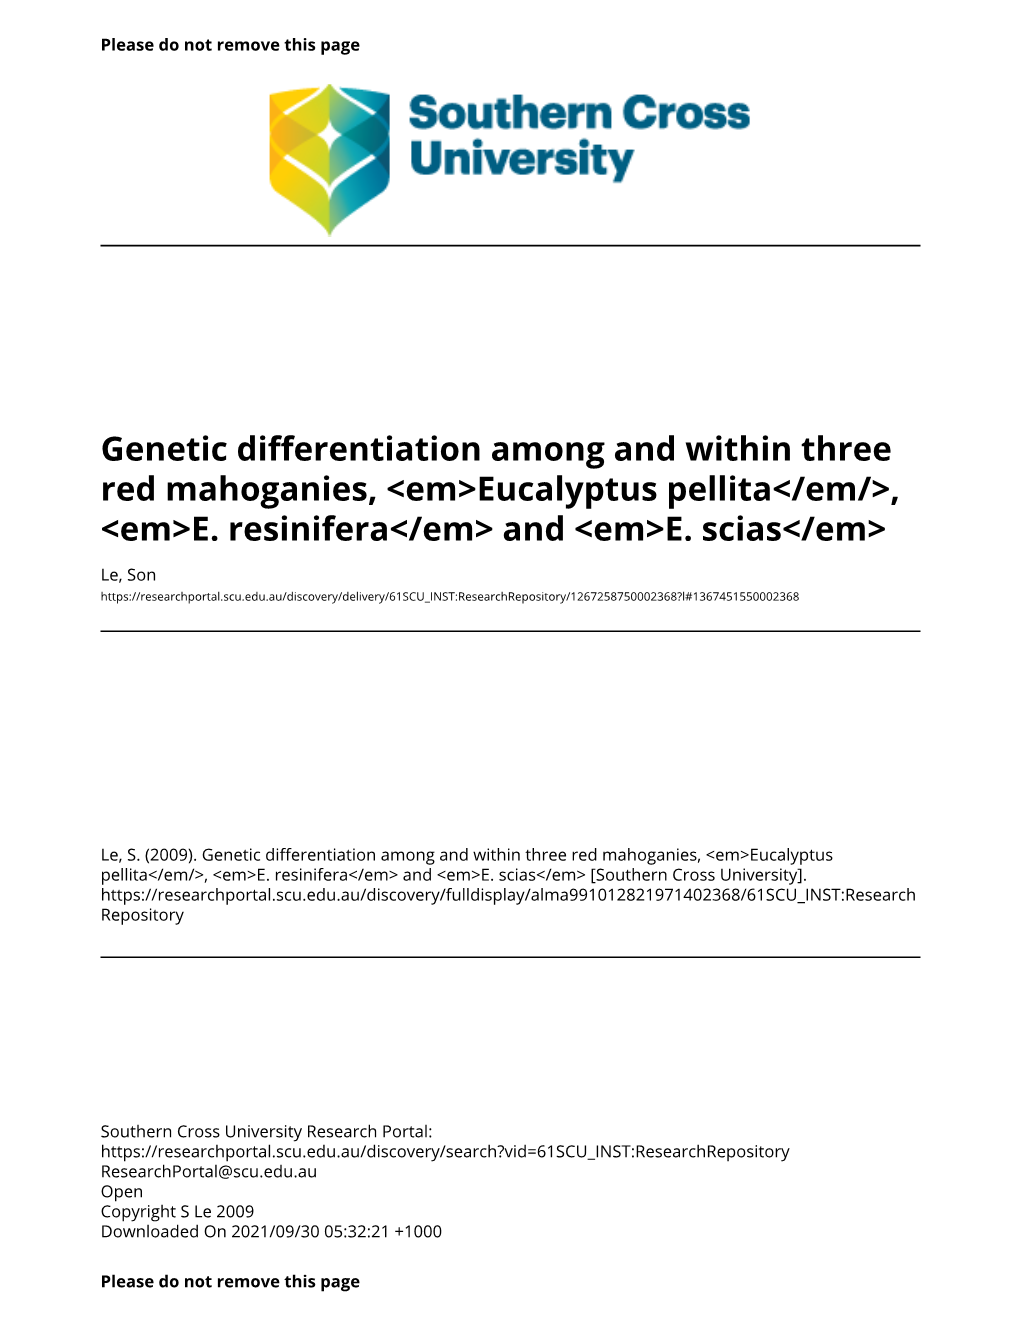 Genetic Differentiation Among and Within Three Red Mahoganies, &lt;Em